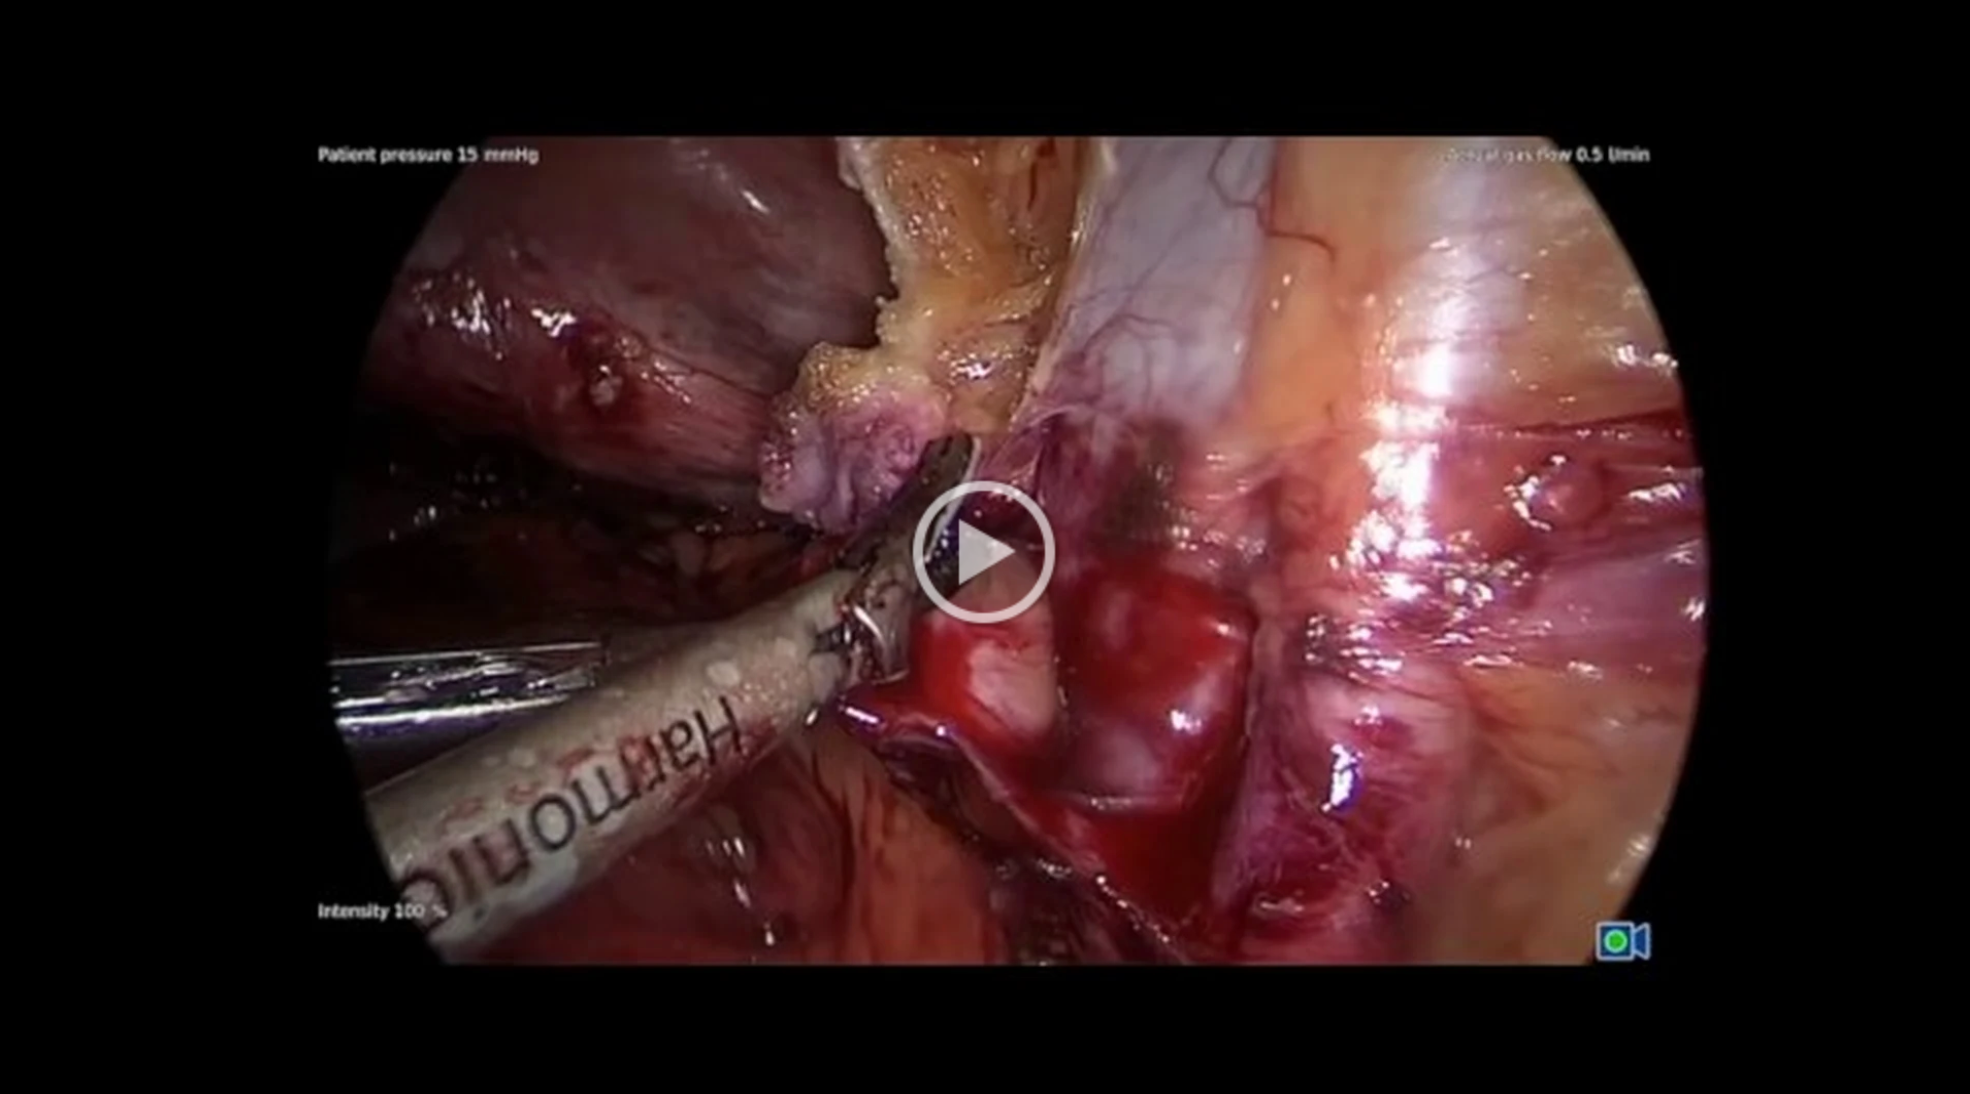 Ovarian Remnant Resection Surgery